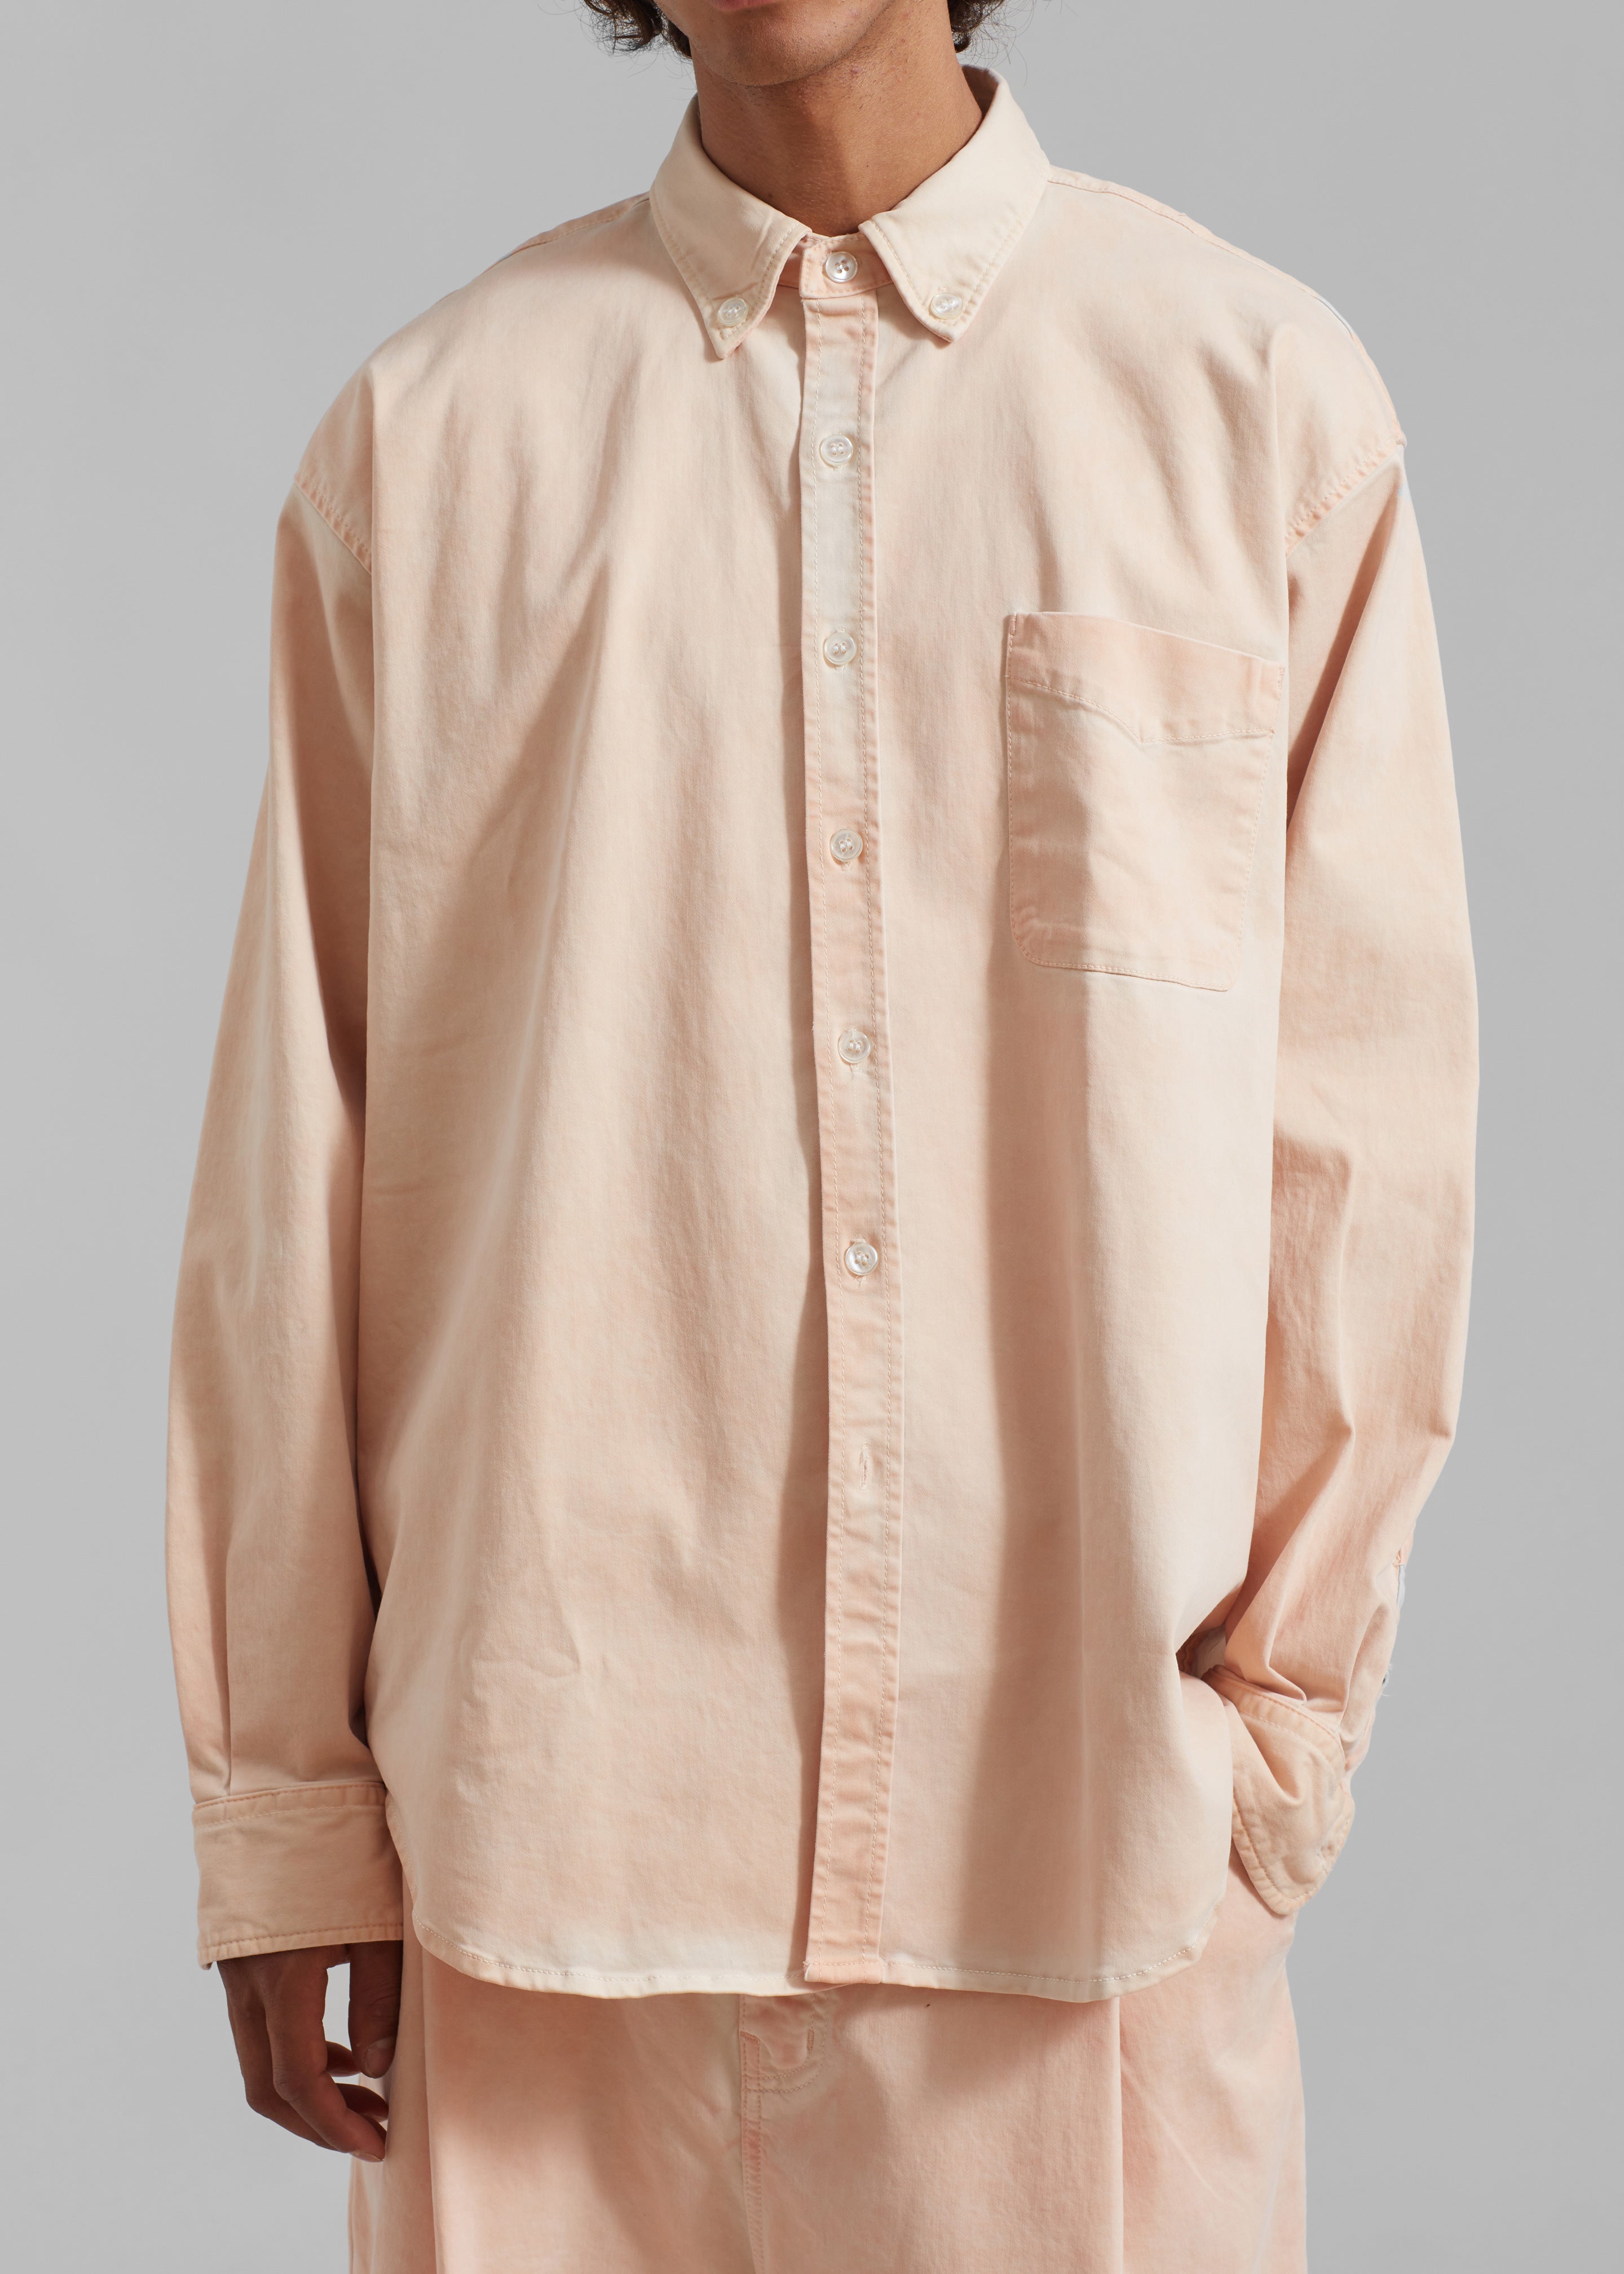 Sinclair Shirt - Faded Pink - 3